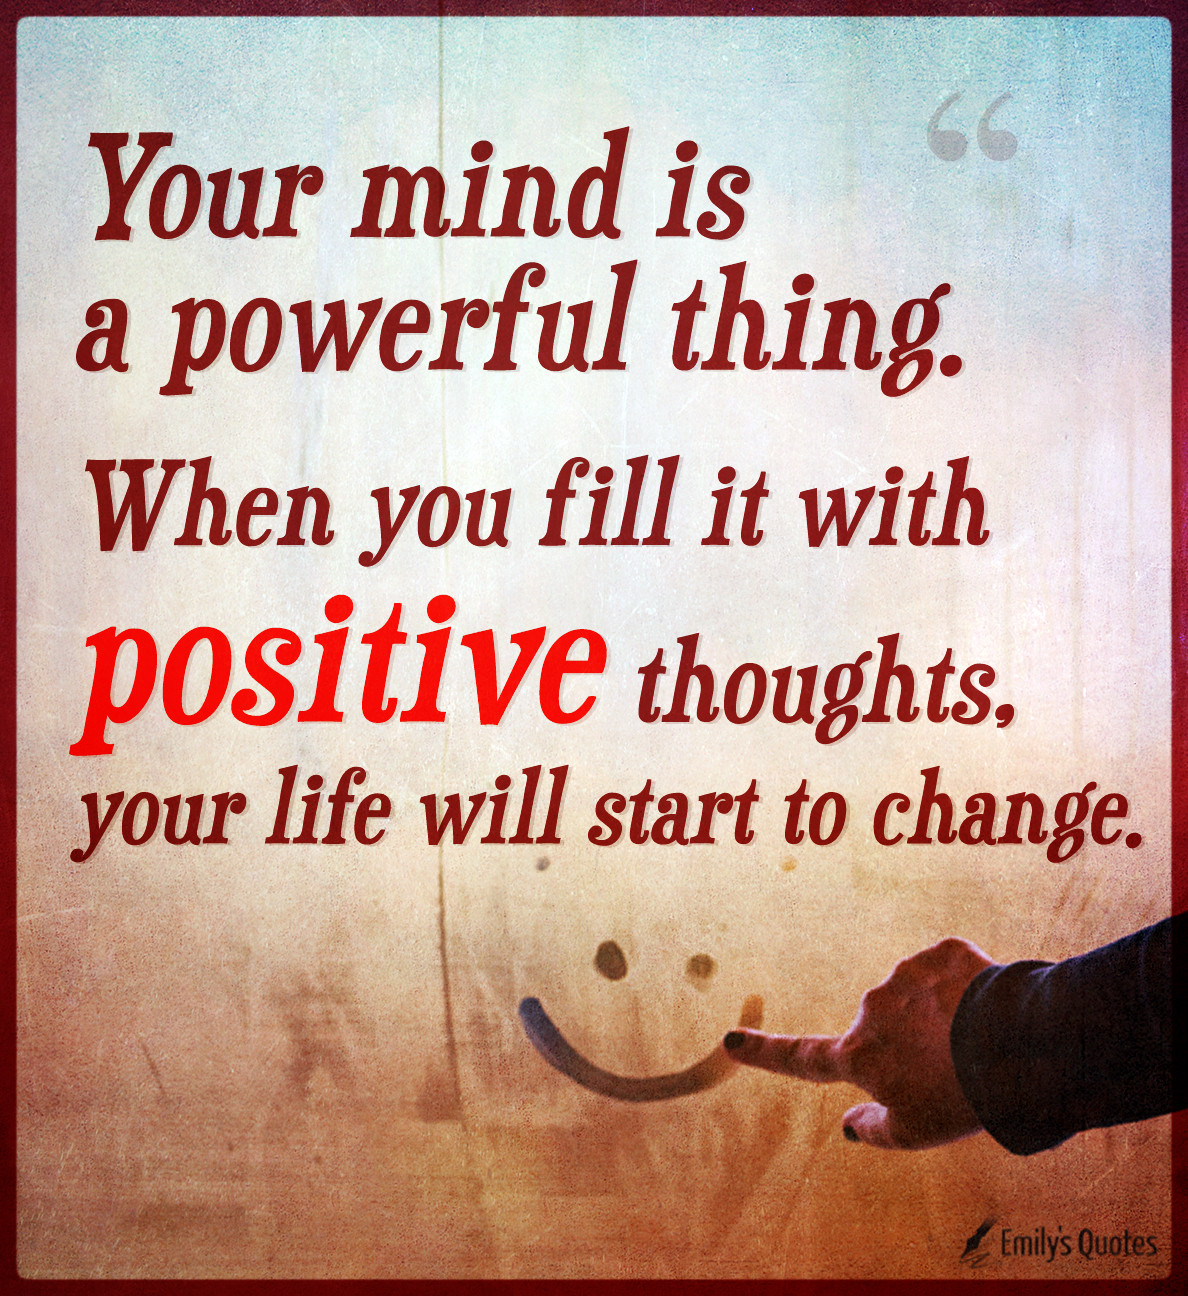 Powerful Positive Quotes
 Your mind is a powerful thing When you fill it with